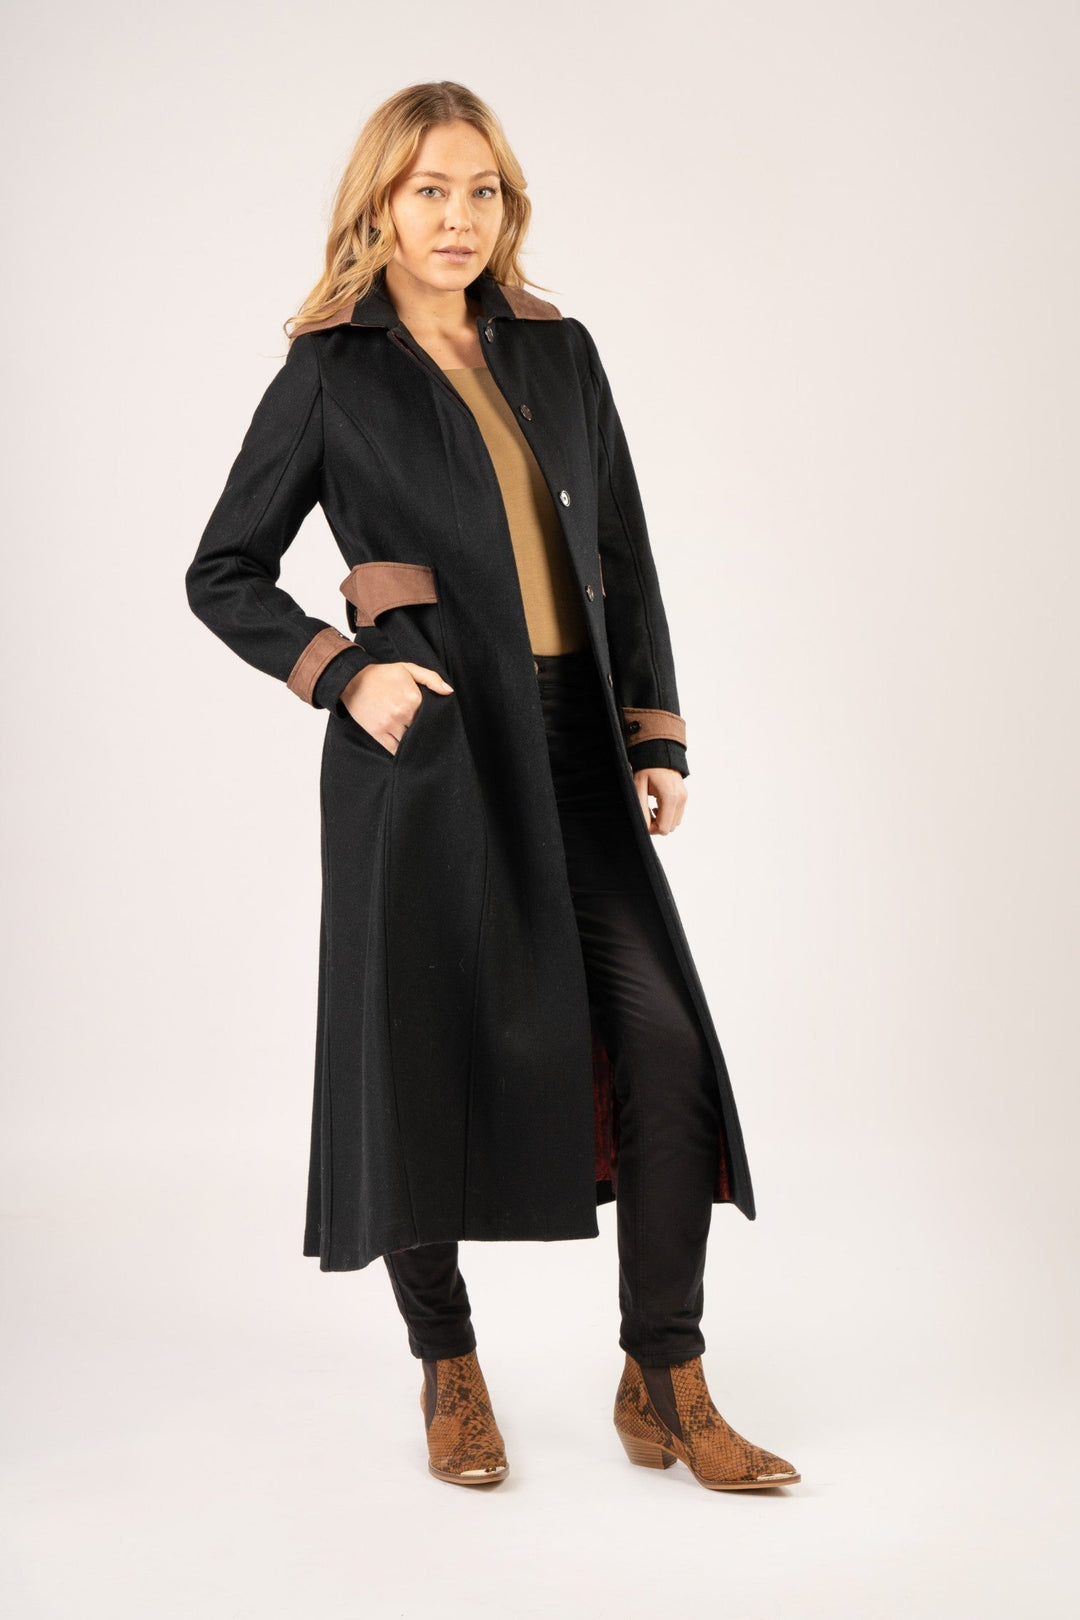 Our Elizabeth Wool Coat is back and this time in a rich navy with chocolate contrast details. Longer line for both warmth and elegance, our Elizabeth Wool Women's Coat is a timeless piece. With an adjustable belt feature you can bring the coat in to accentuate the female silhouette or to provide more freedom of movement when wearing extra layers.